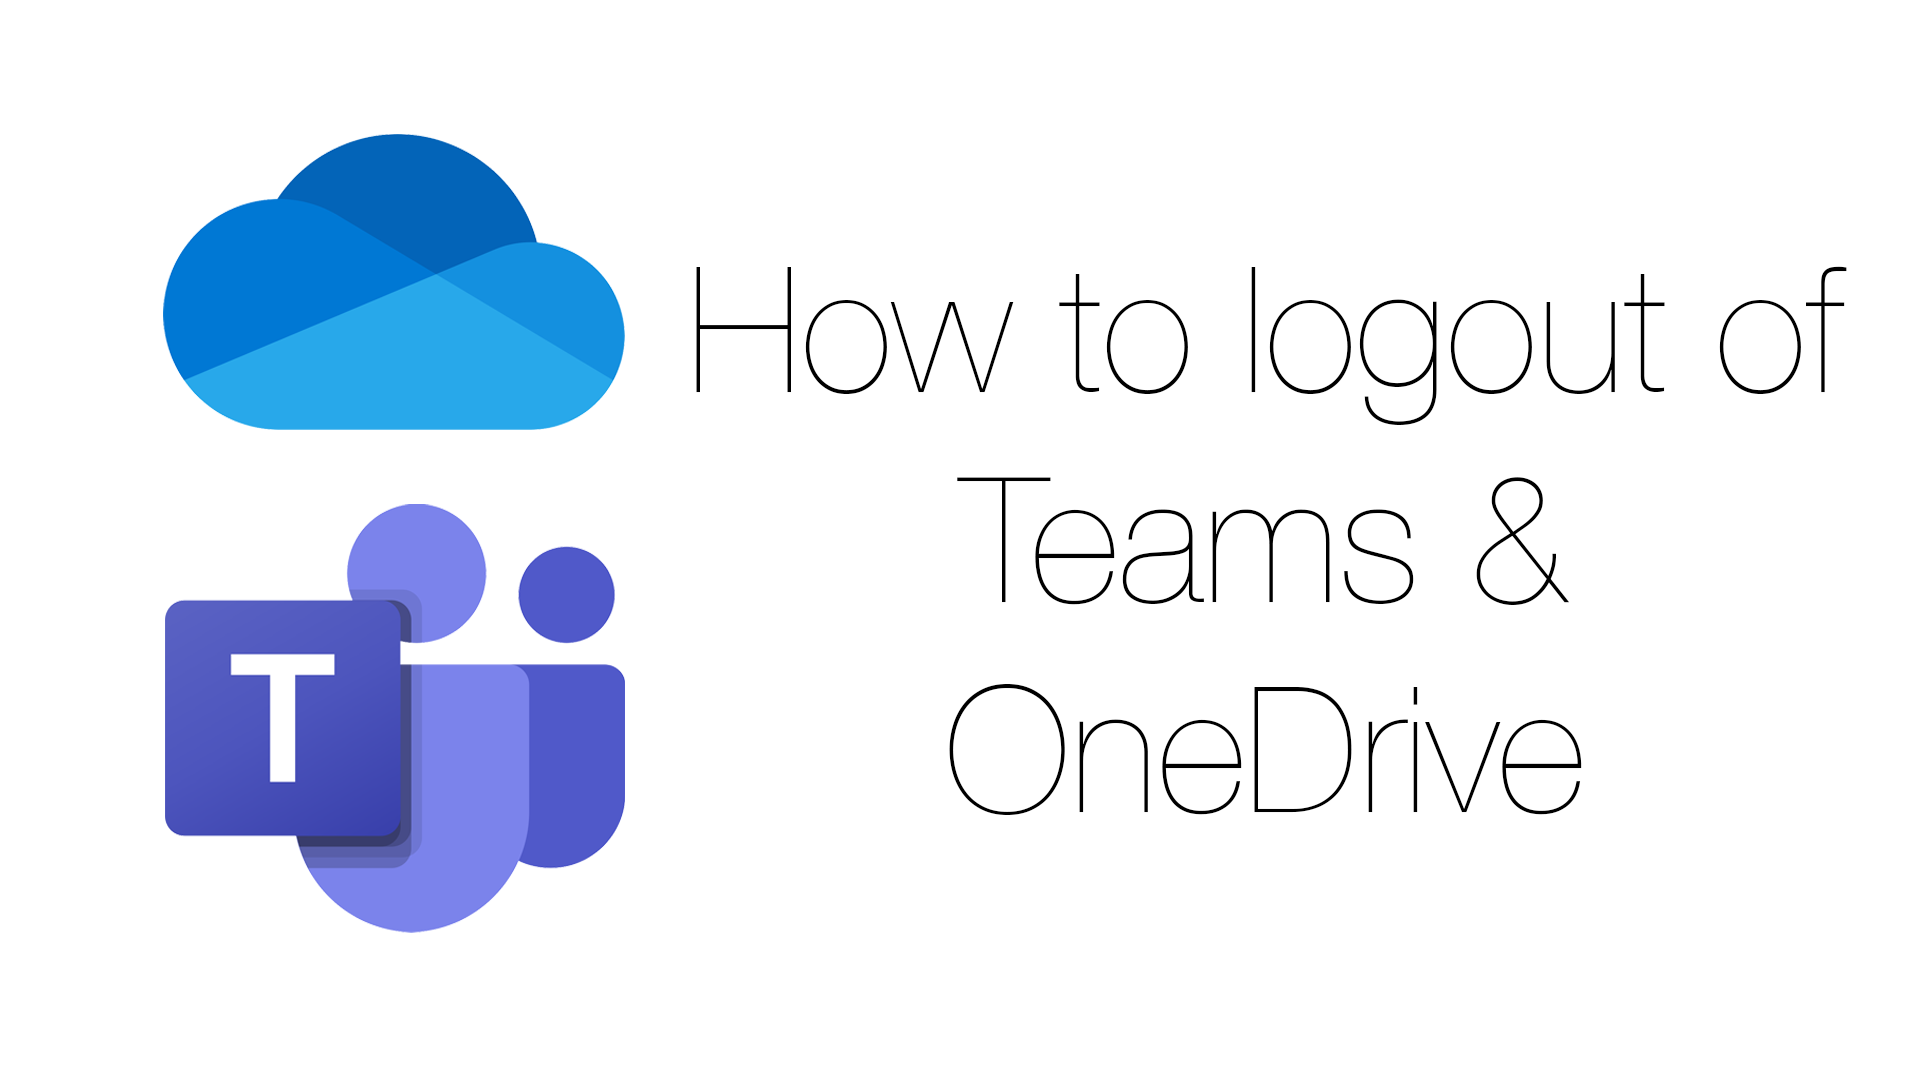 How to logout of Teams & OneDrive